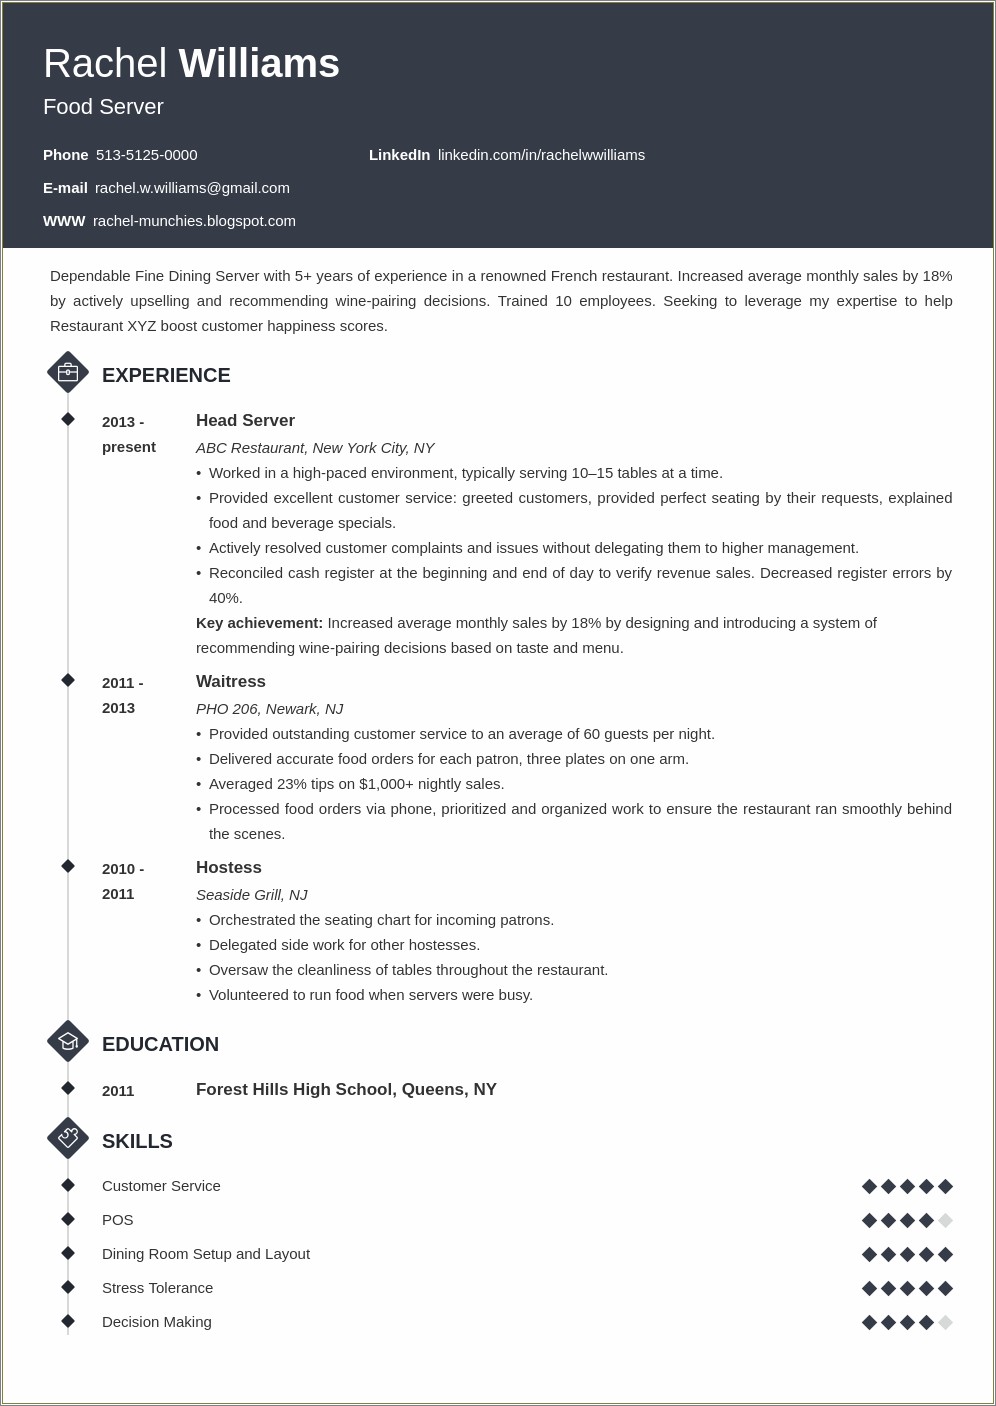 Resume Example For Applying To A Server Position